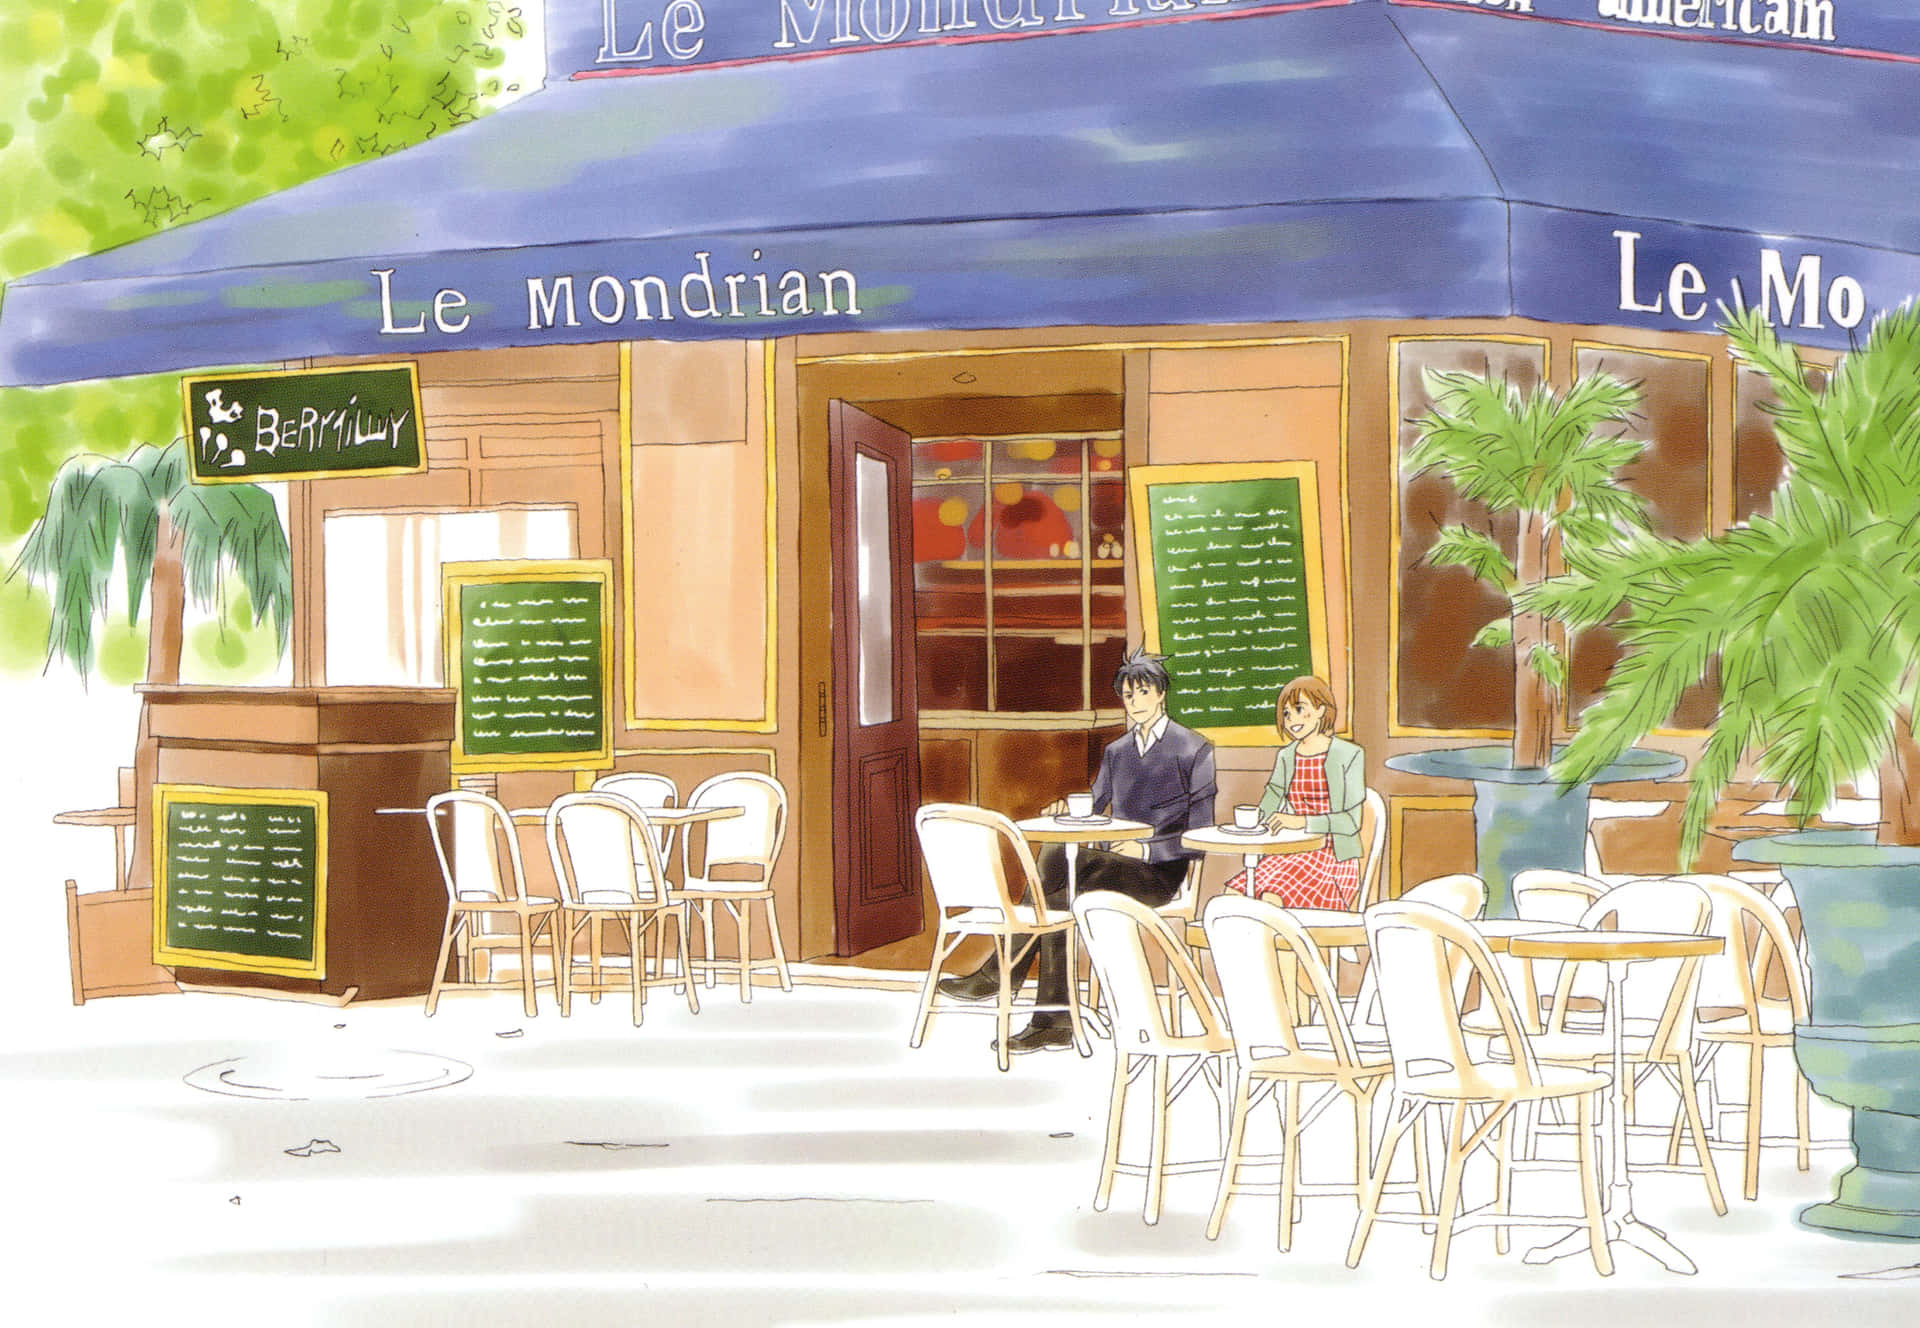 "Welcome to Cafe Anime, where dreams and flavor come alive!" Wallpaper